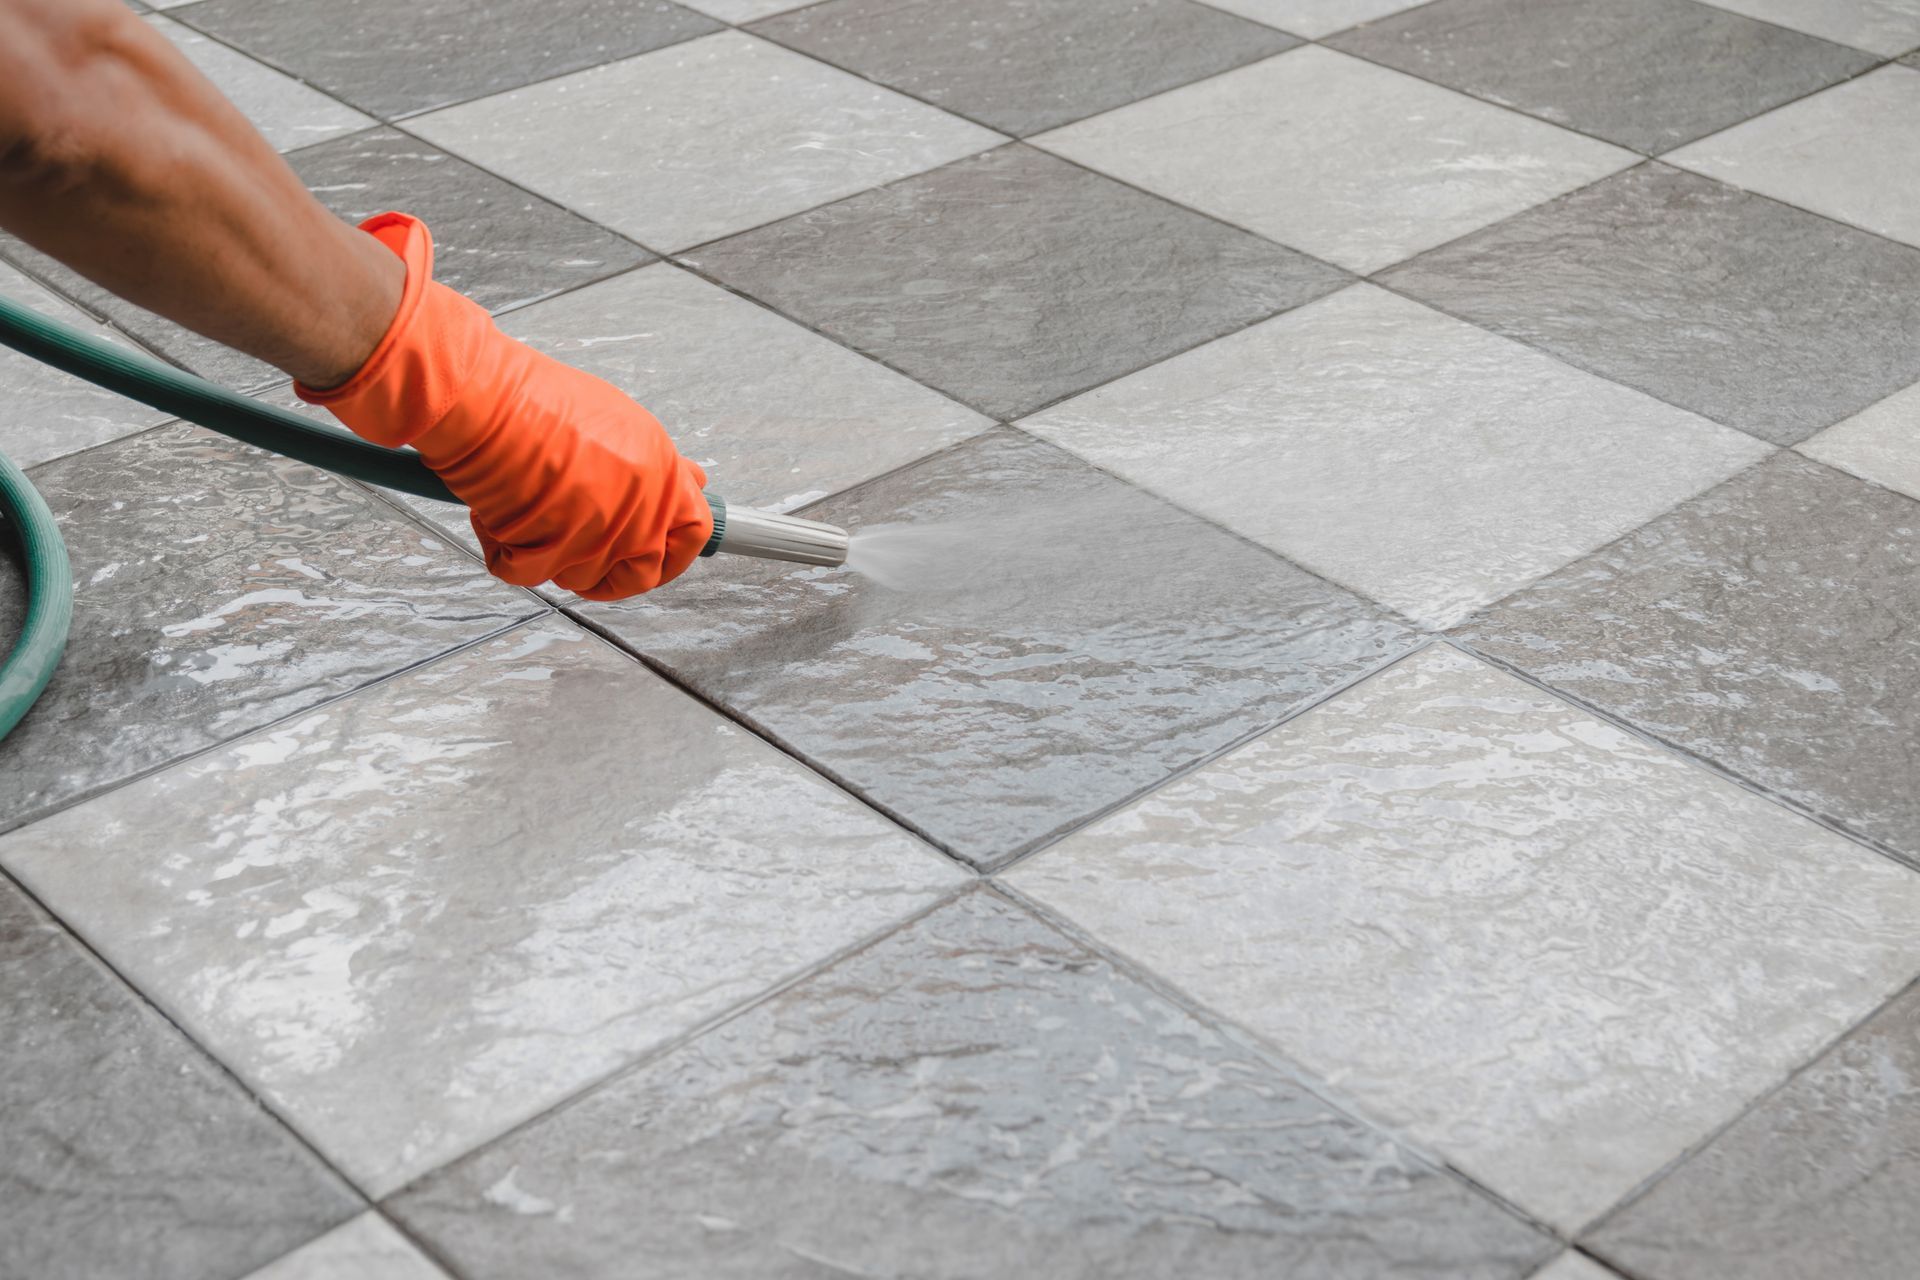 A person wearing bright orange rubber gloves is using a hose to clean the tile floor.